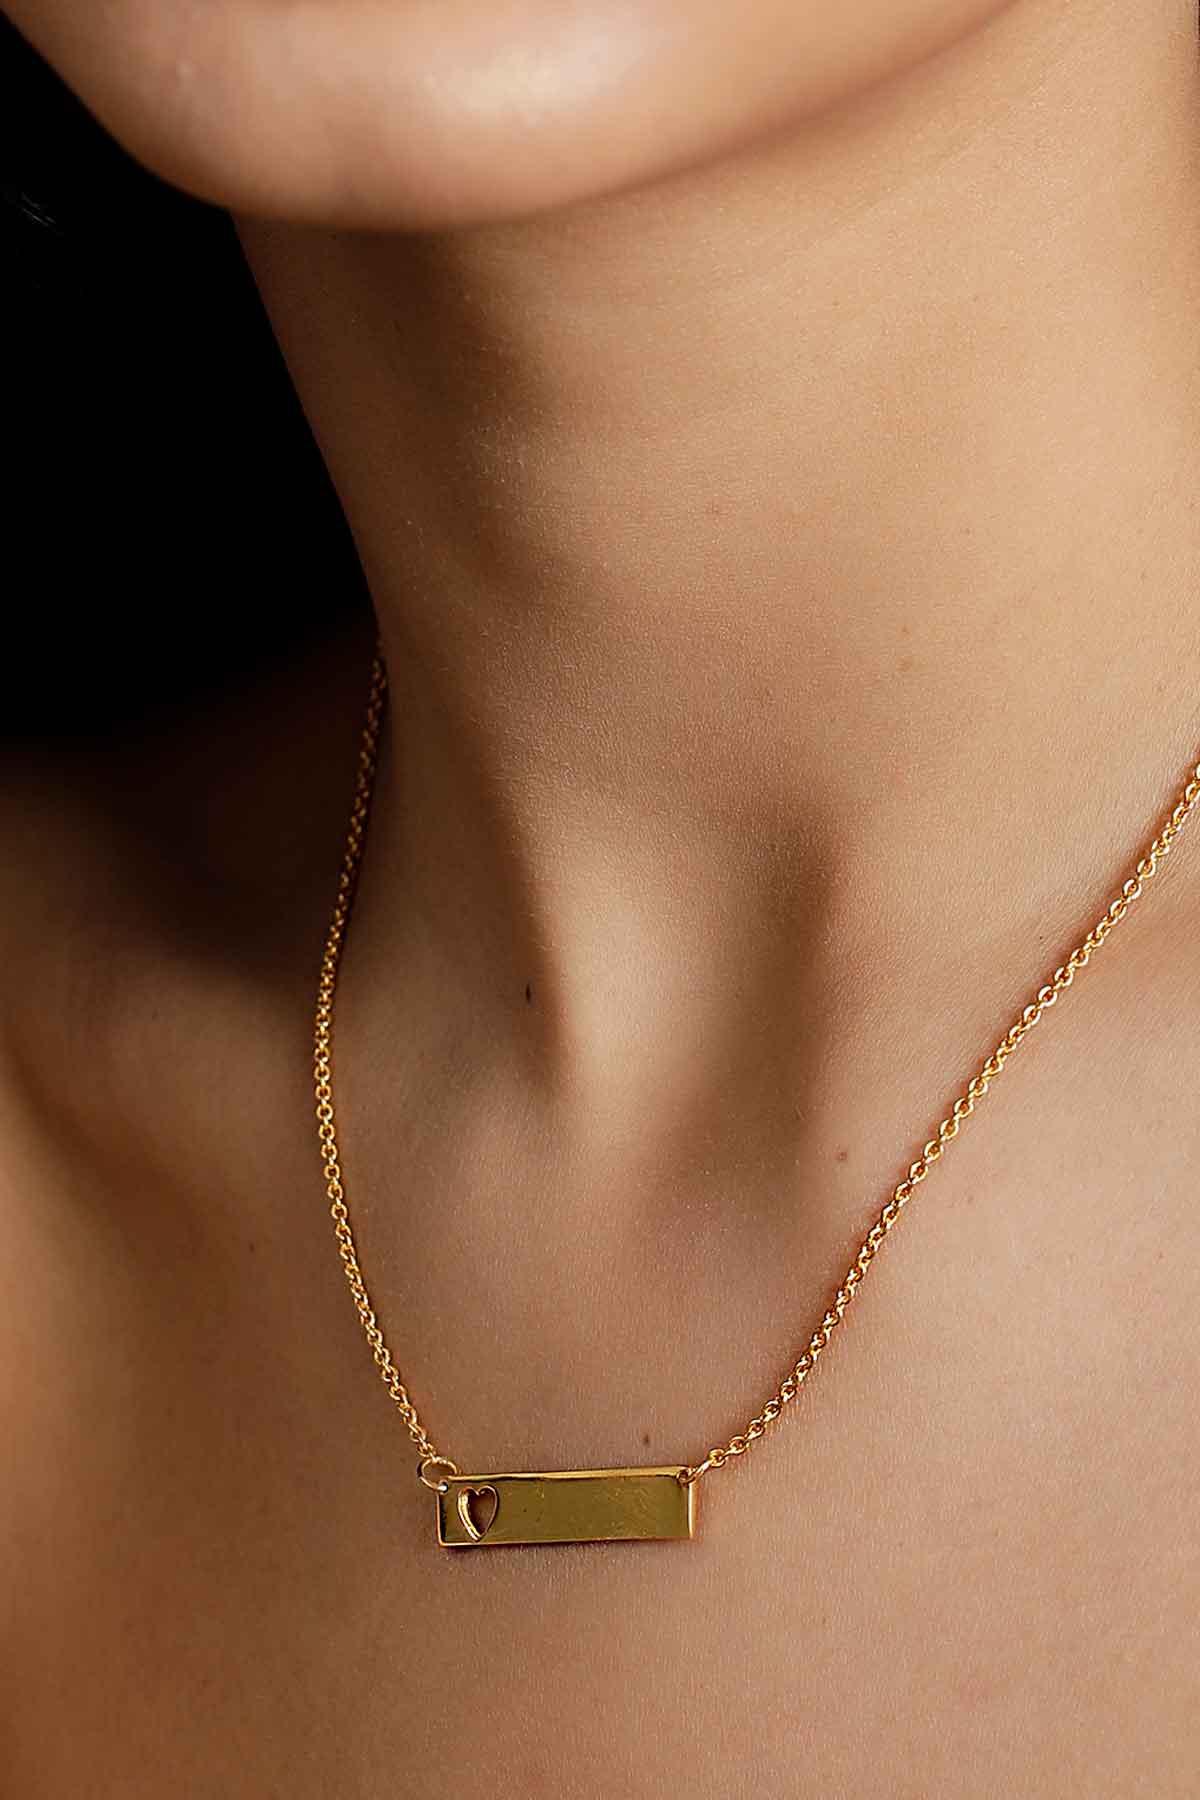 The Golden Couer Necklace